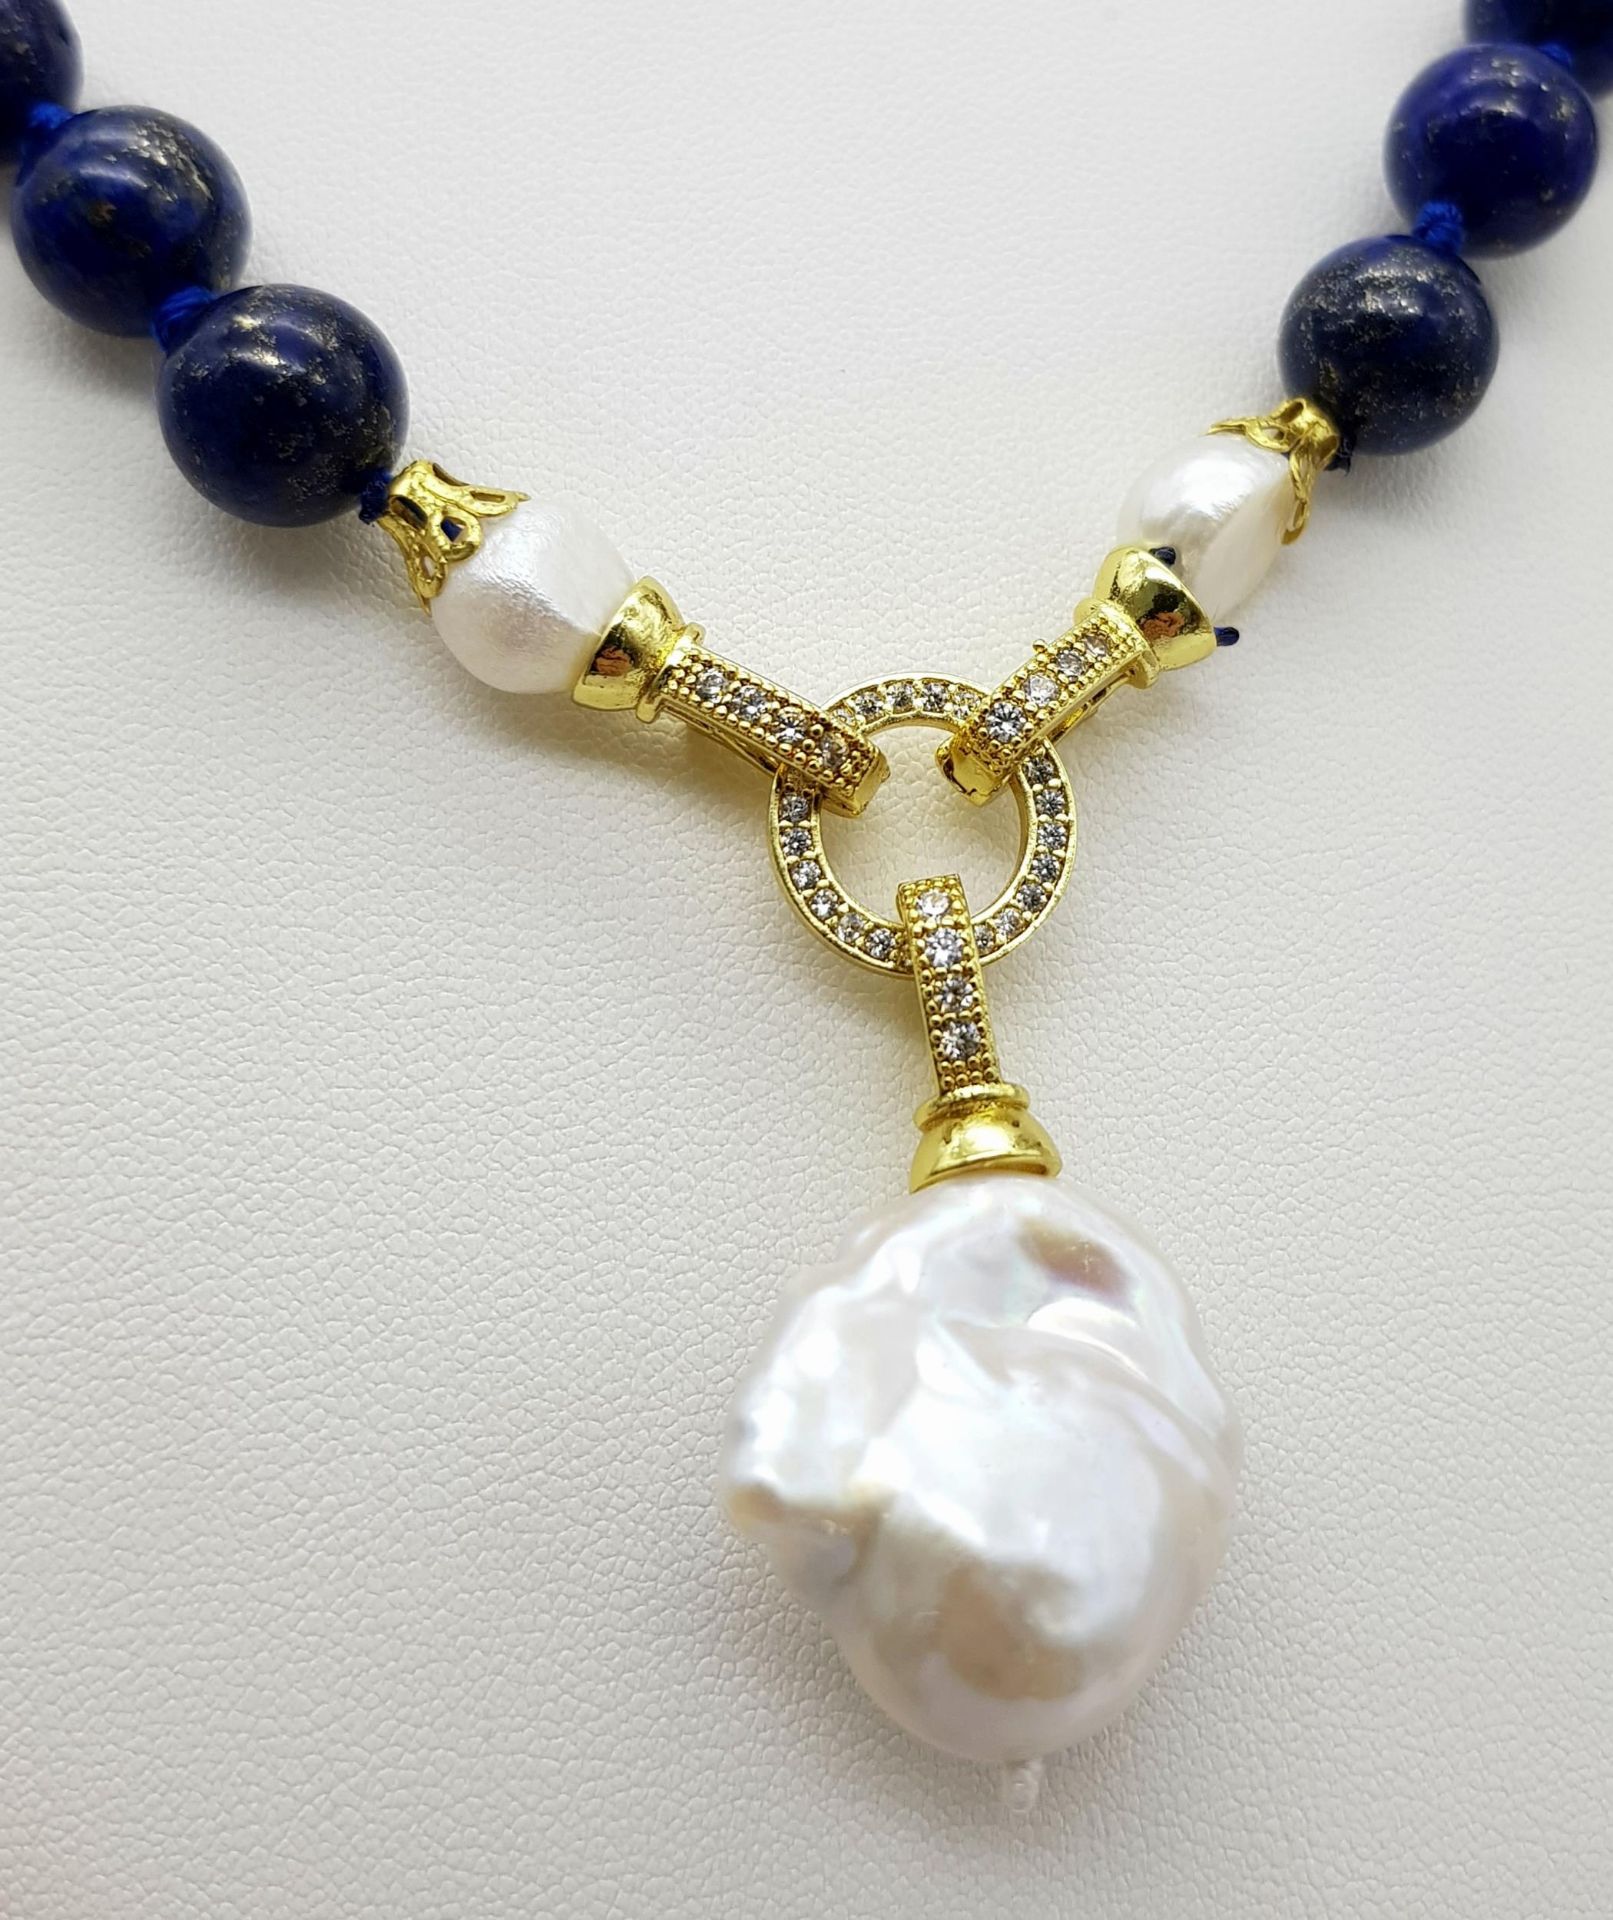 A Lapis Lazuli Beaded Necklace with Baroque Pearl Pendant. 10mm beads. Pendant - 6cm. Necklace - Image 2 of 4